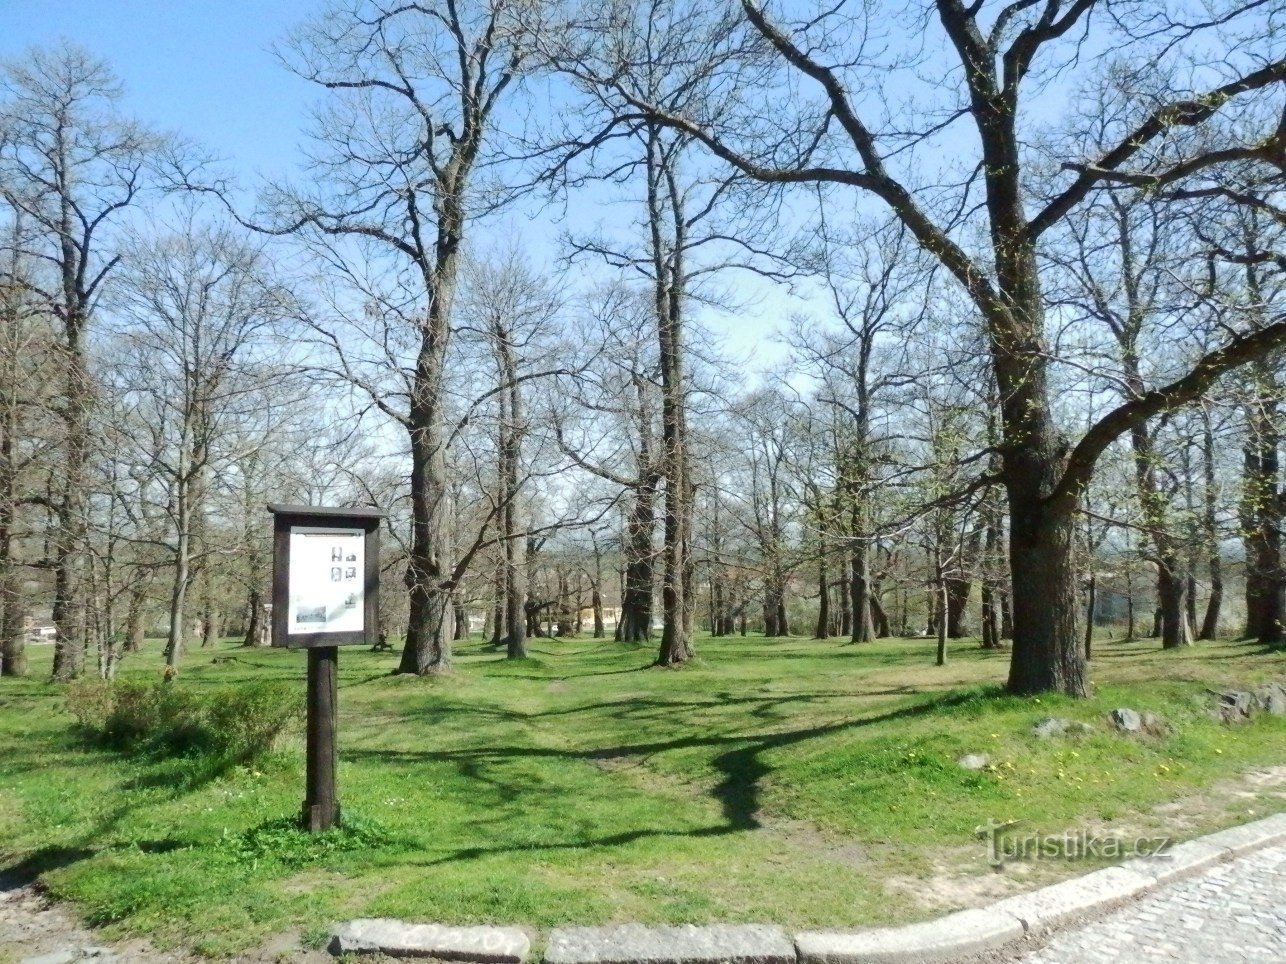 Entrance to the orchard